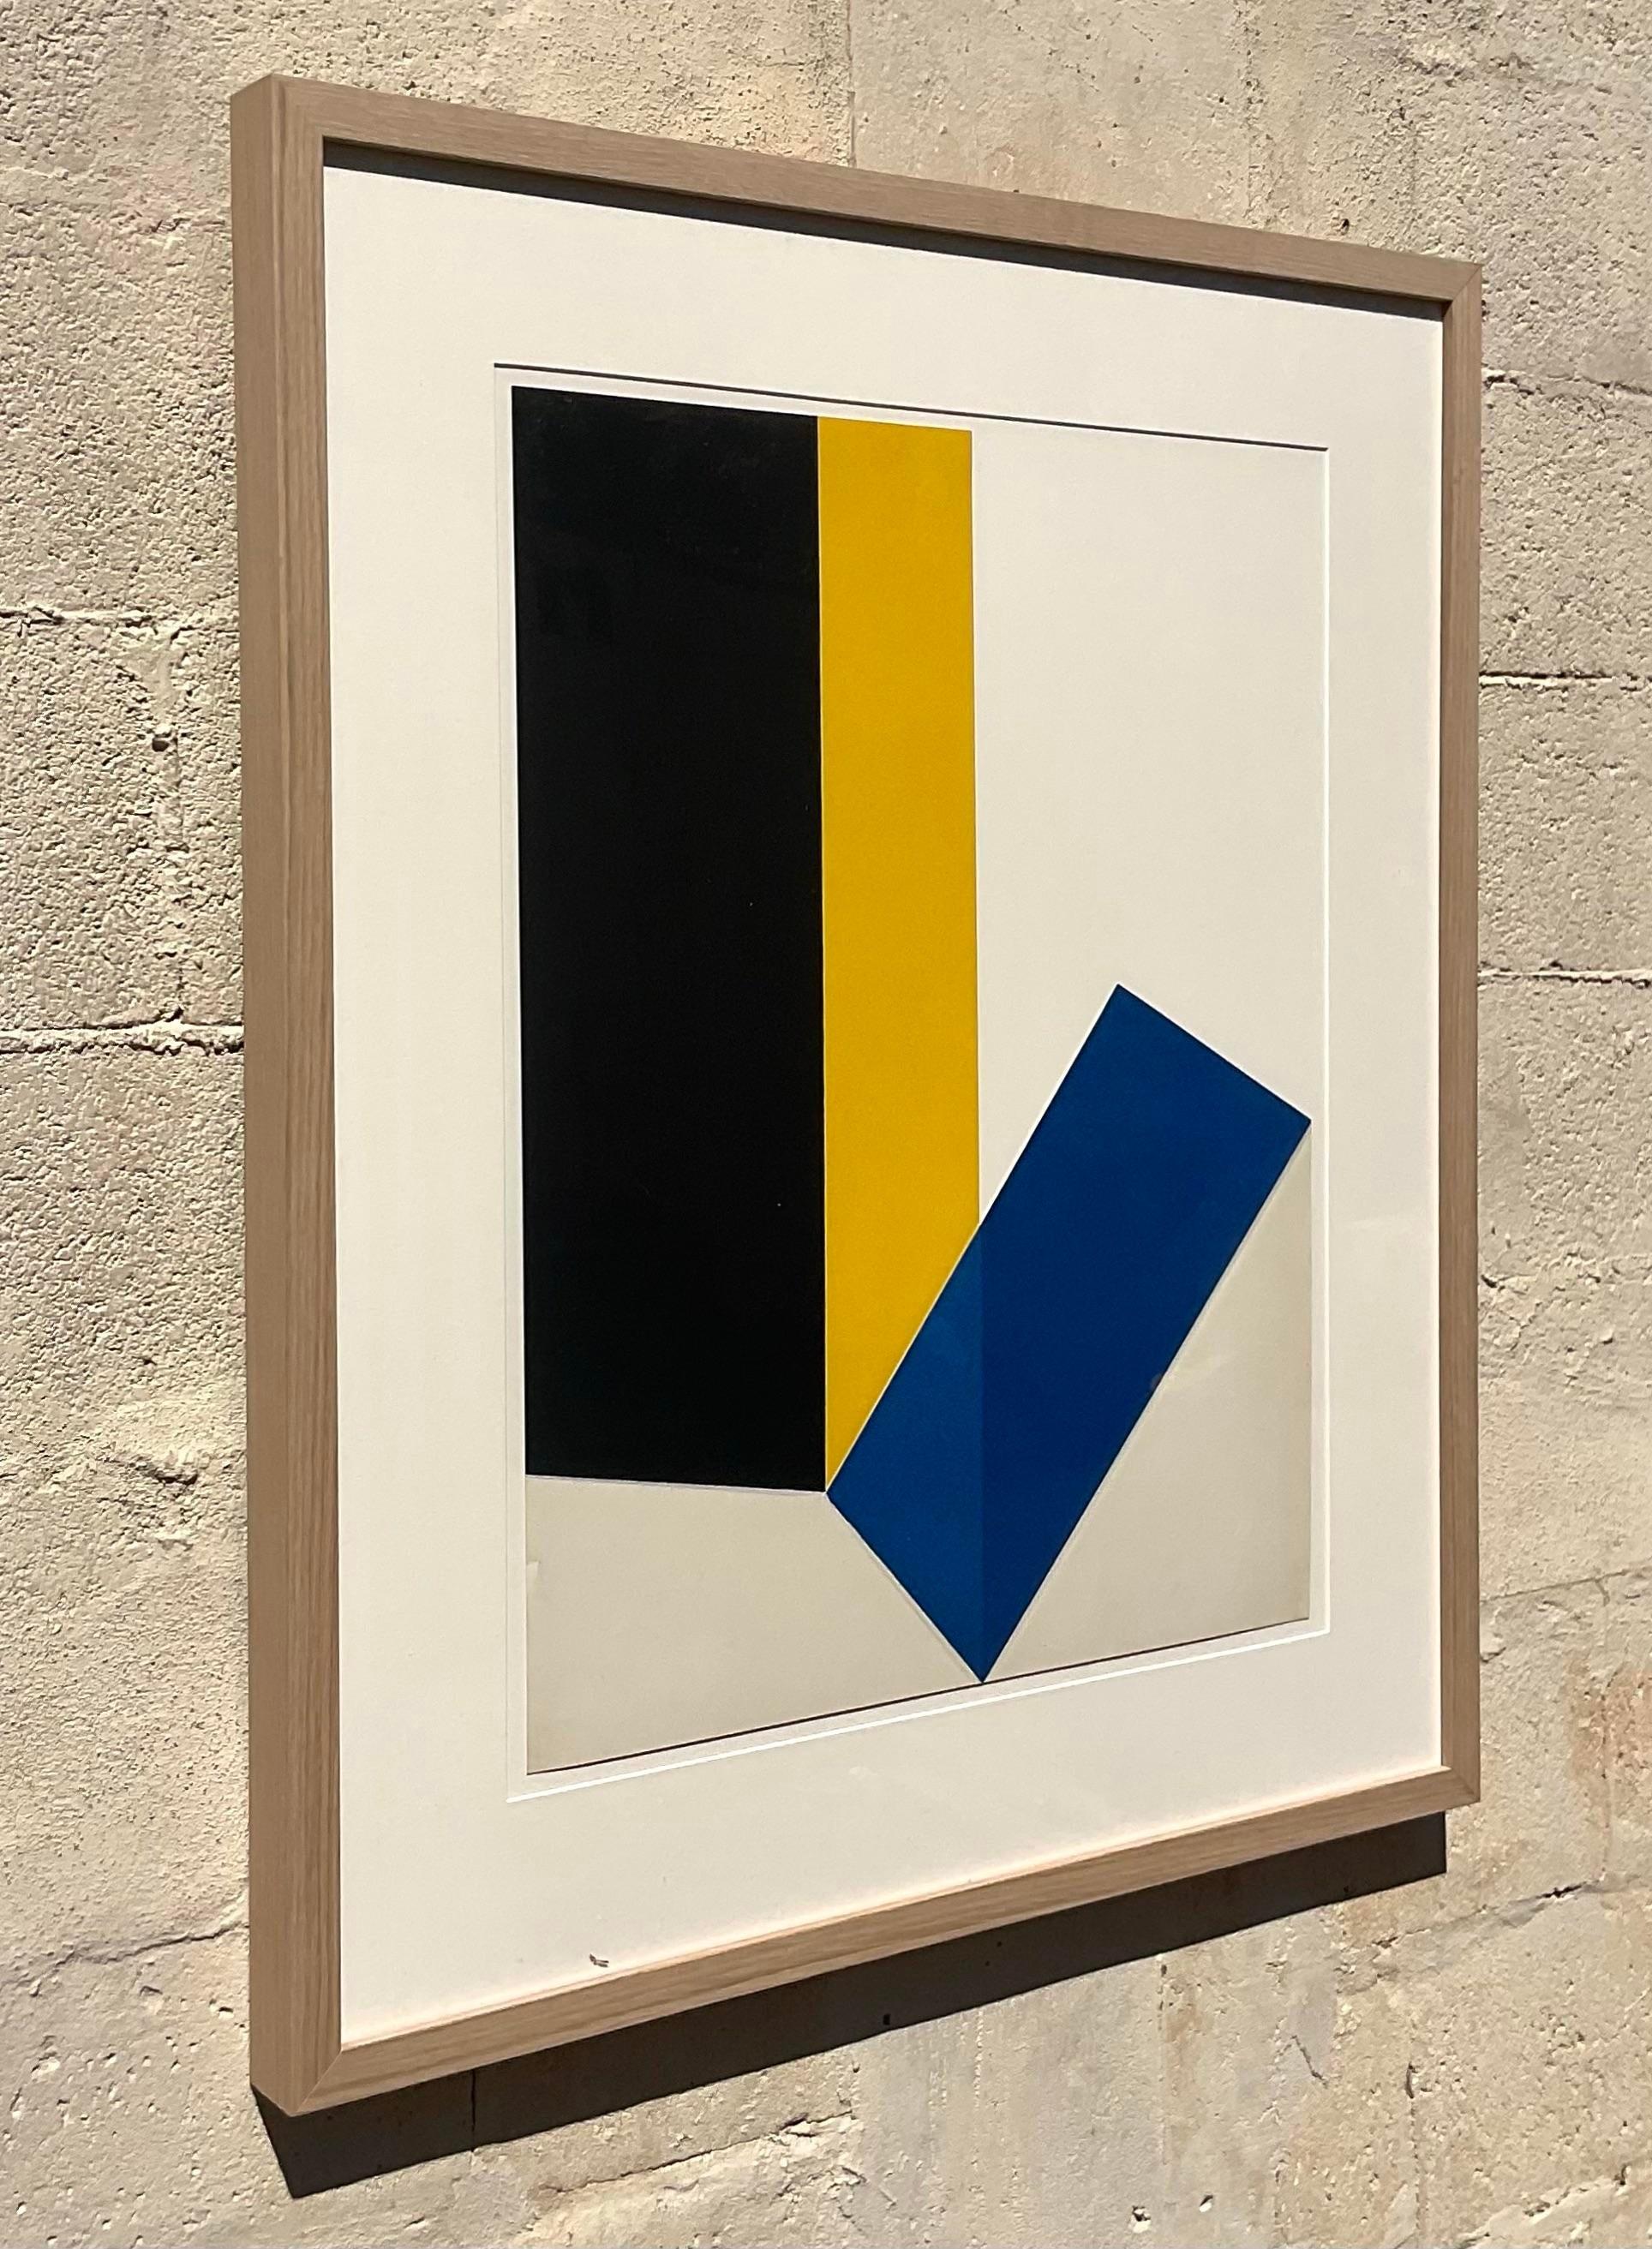 Vintage minimalistic lithograph of an abstract geometric object. The shape creates a gorgeous color block and the a subtle addition of colors makes this vintage piece tasteful and modern. Signed en verso by the artist. Acquired from a Palm beach